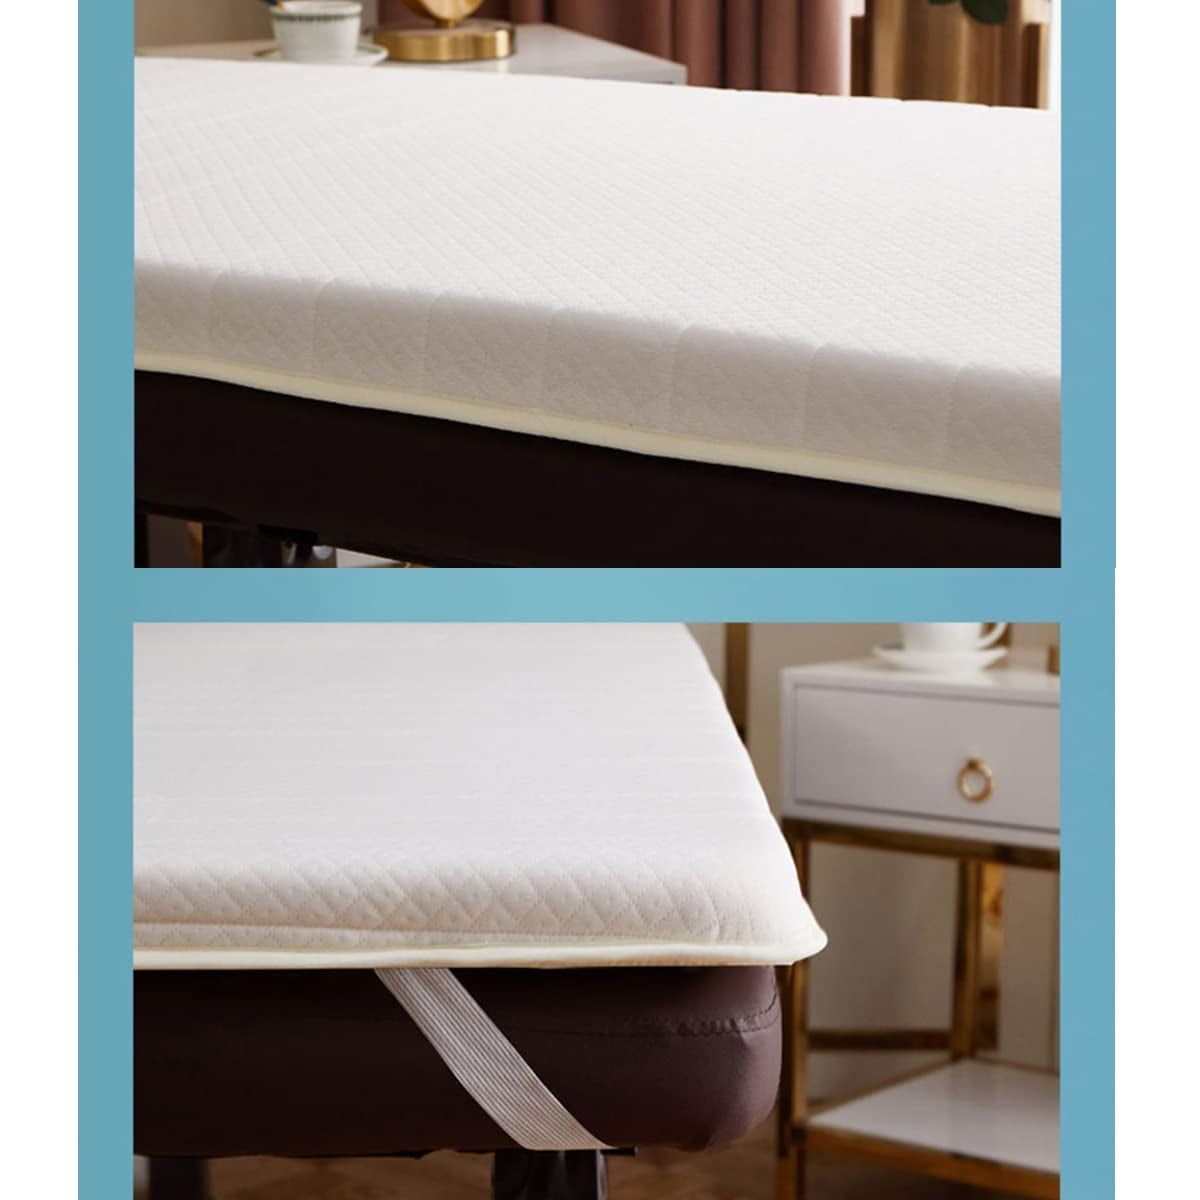 Imeshbean 5 Layers Memory Foam & Latex Massage Table Bed Mattress Topper with Elastic Straps and Non-Slip Particles to Secure to Table ((Massage Table